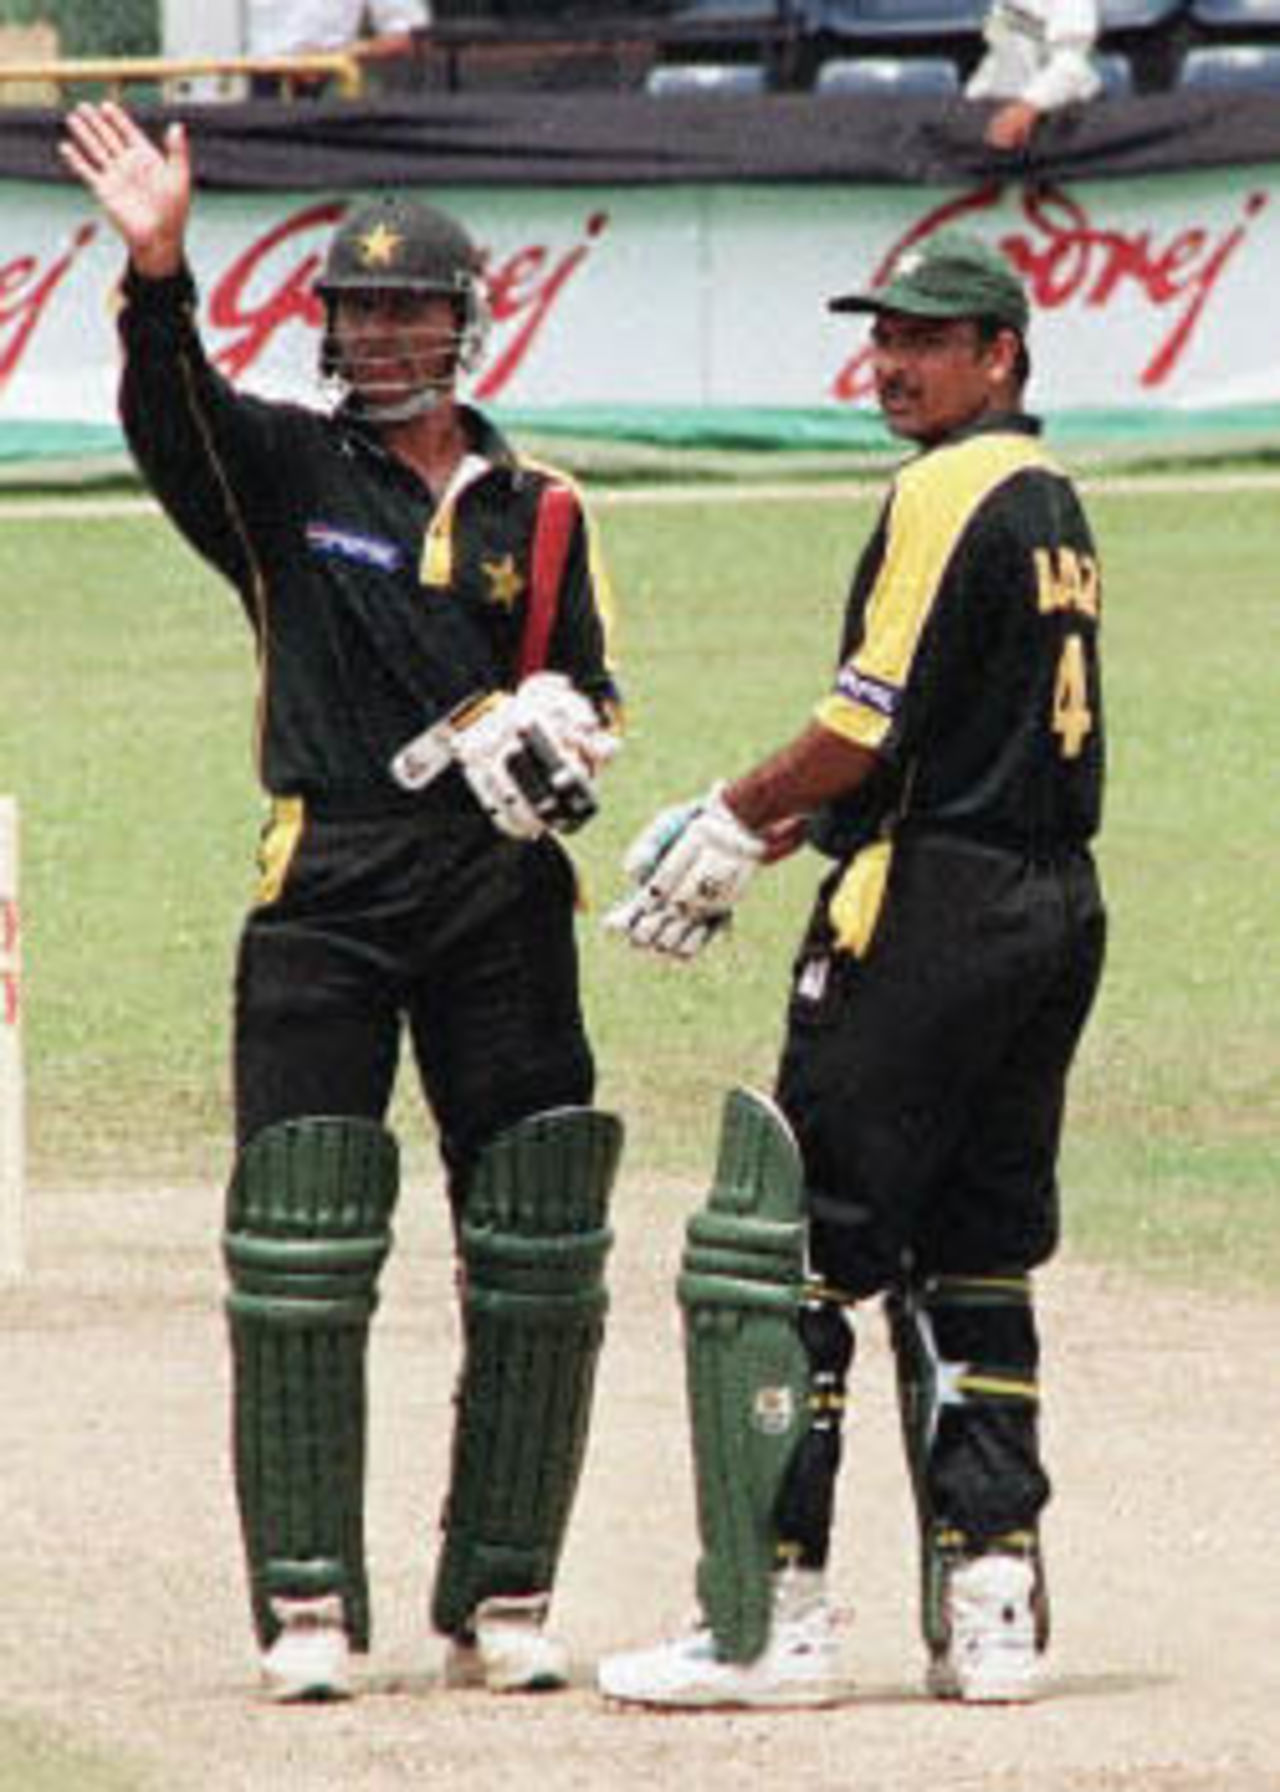 Pakistan's Abdur Razzaq (L) waves to the crowd as his teammate Ijaz Ahmed (R) watches during their match against South Africa at the Singapore Challenge 2000. Pakistan made 227 for nine off their 50 overs against South Africa. Godrej Singapore Challenge, 2000/01, 2nd Match, Pakistan v South Africa, Kallang Ground, Singapore 23 August 2000.